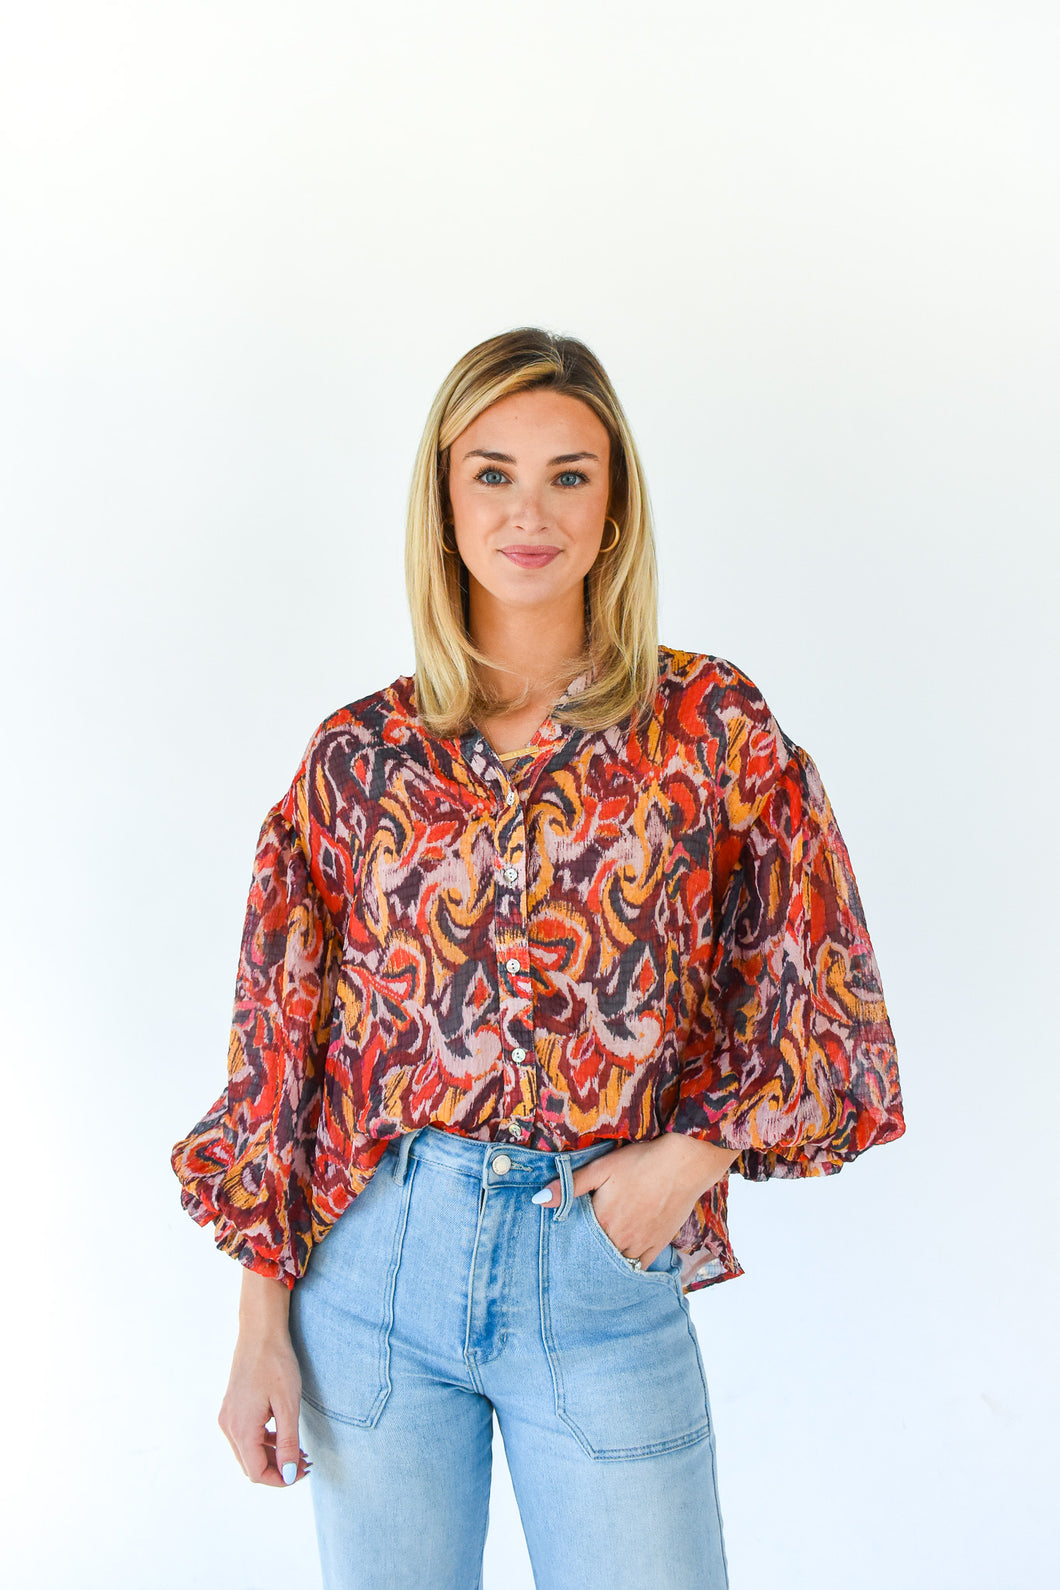 New Kid On The Smock Printed Blouse